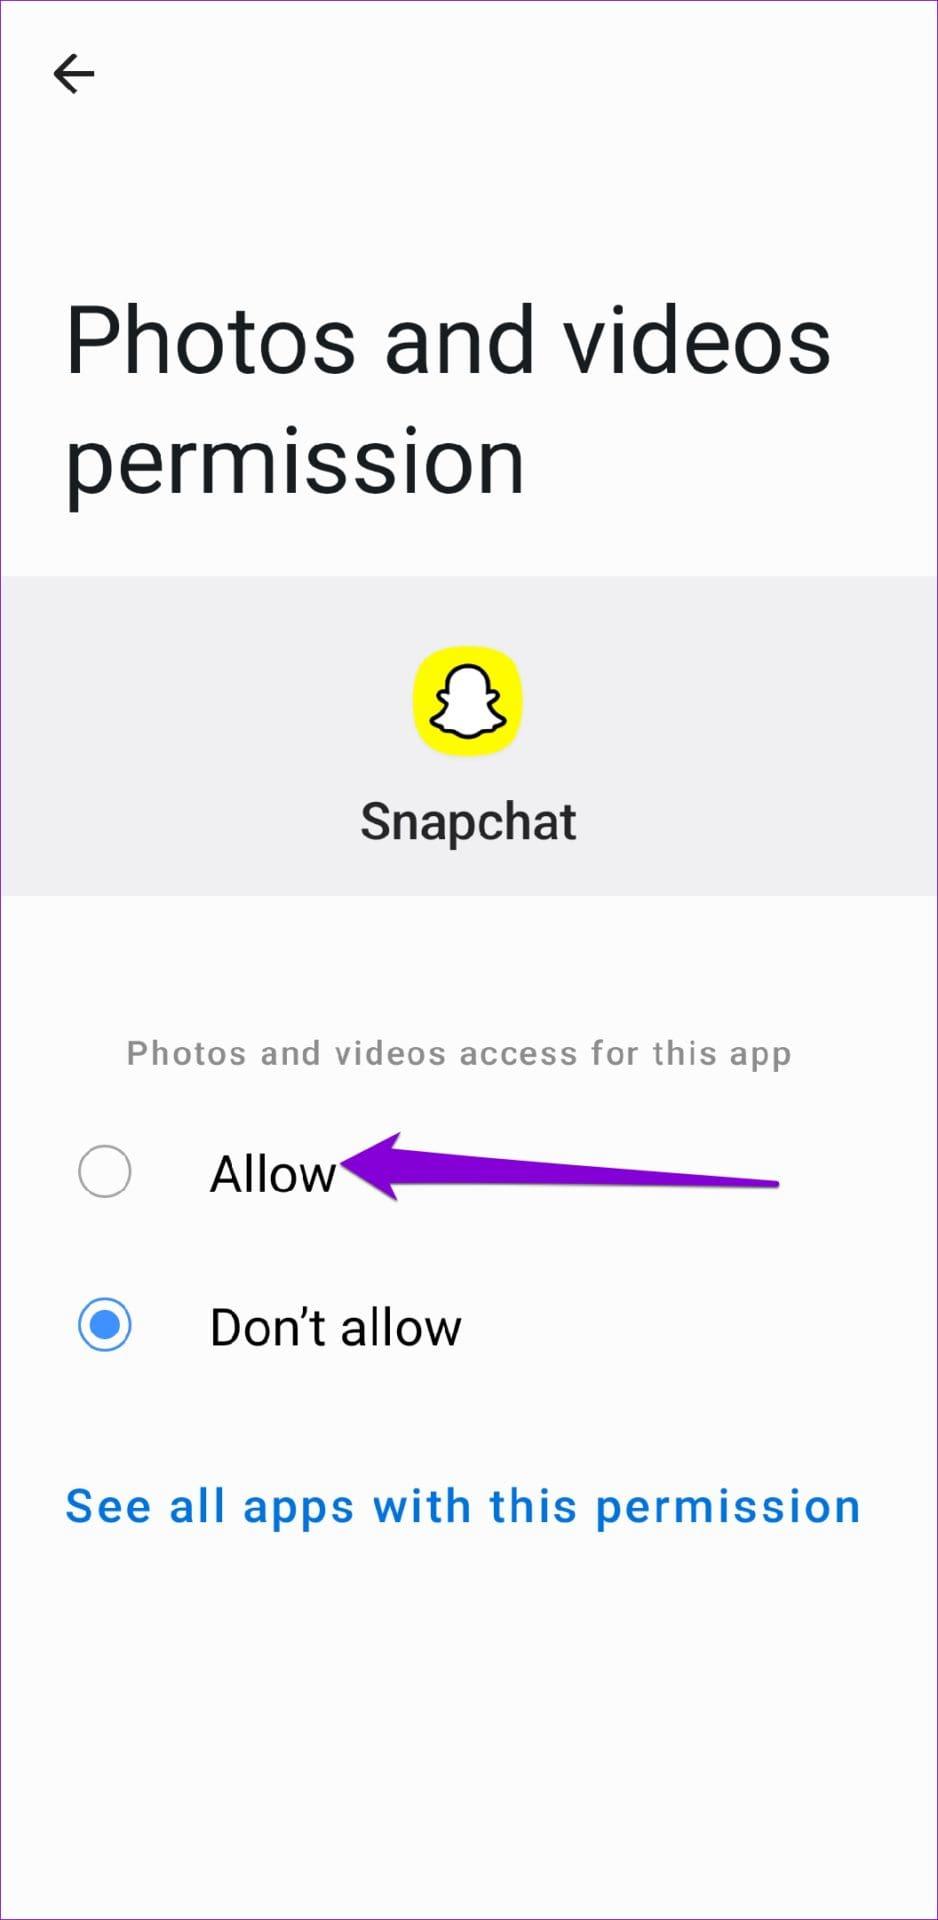 Confirm Log Out of Snapchat